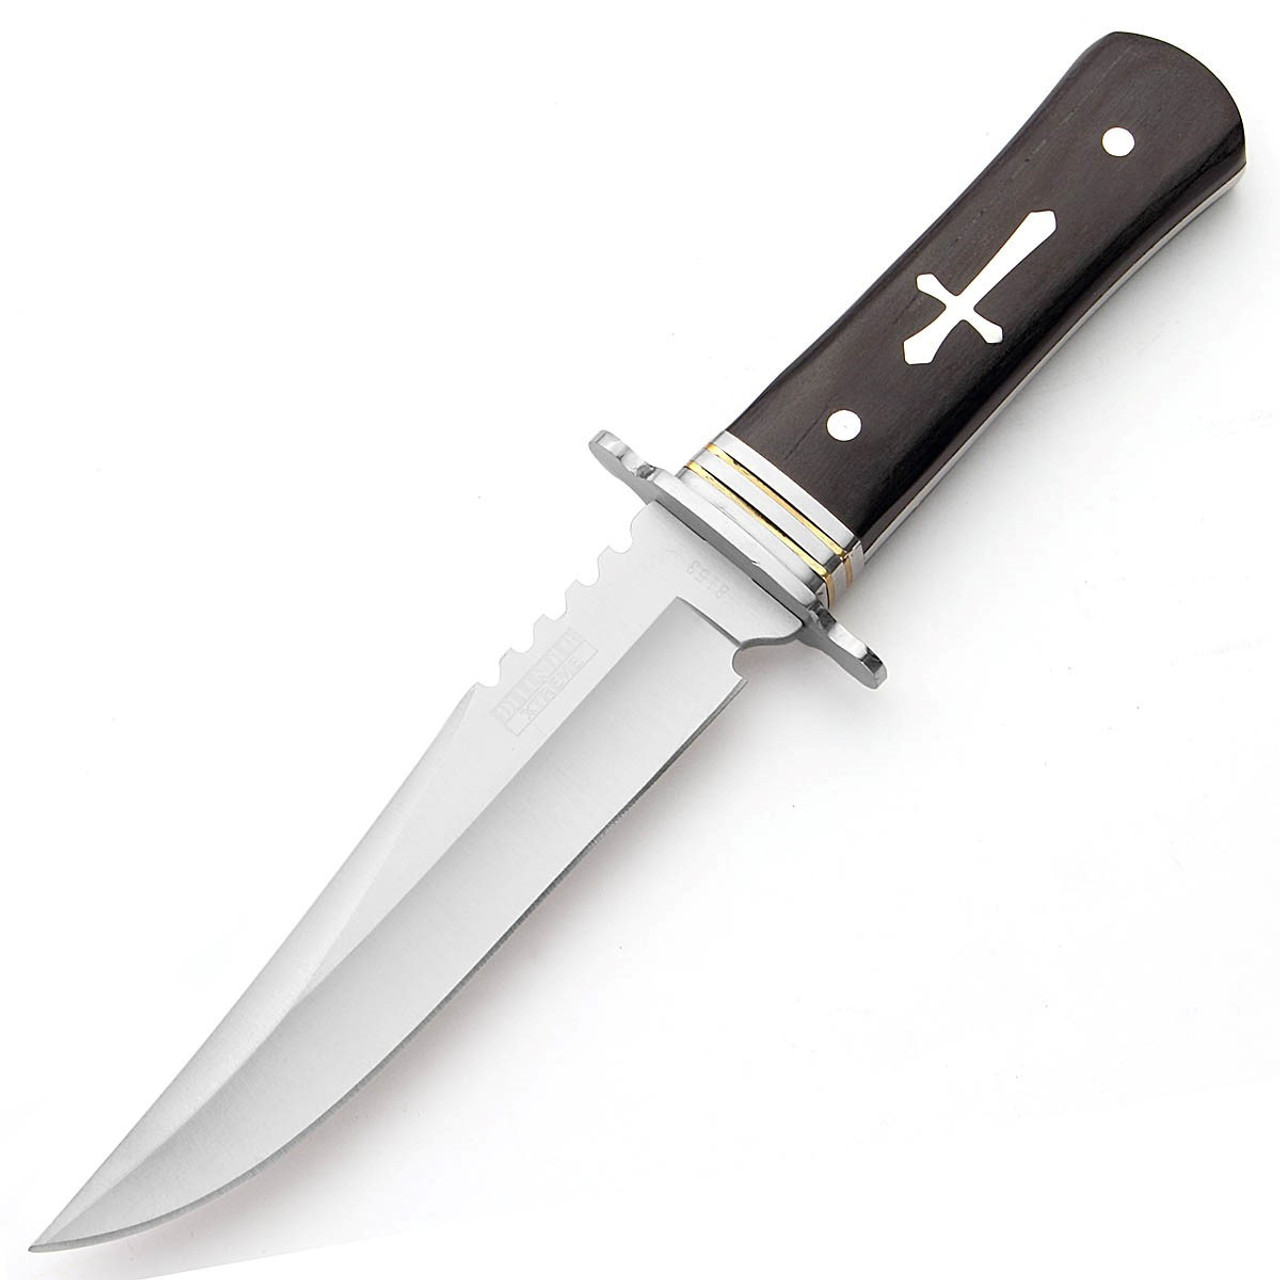 Western Sporting Falconry -: X-Acto #5 - Heavy Duty Cutting / Trimming  Knife - Larger Handle for Sturdy Grip